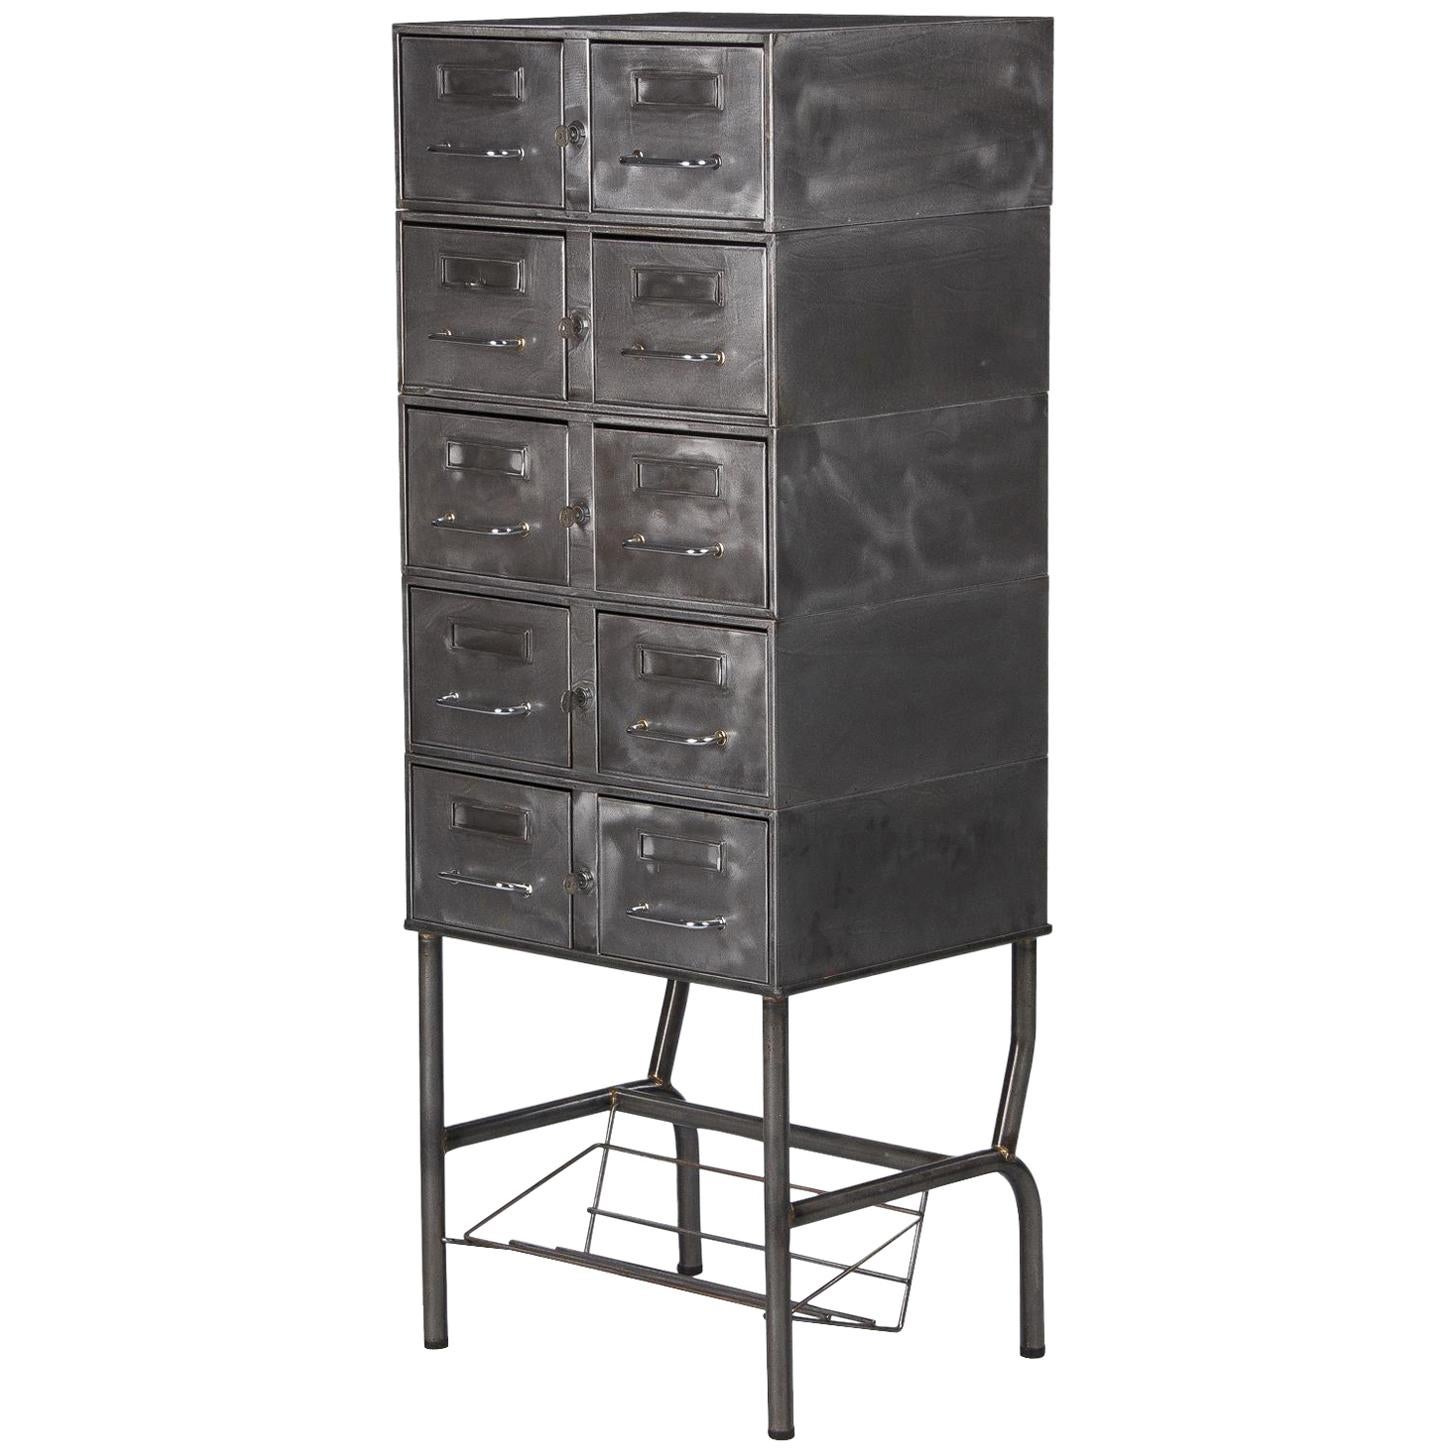 French Midcentury Industrial Polished Steel File Cabinet, 1950s